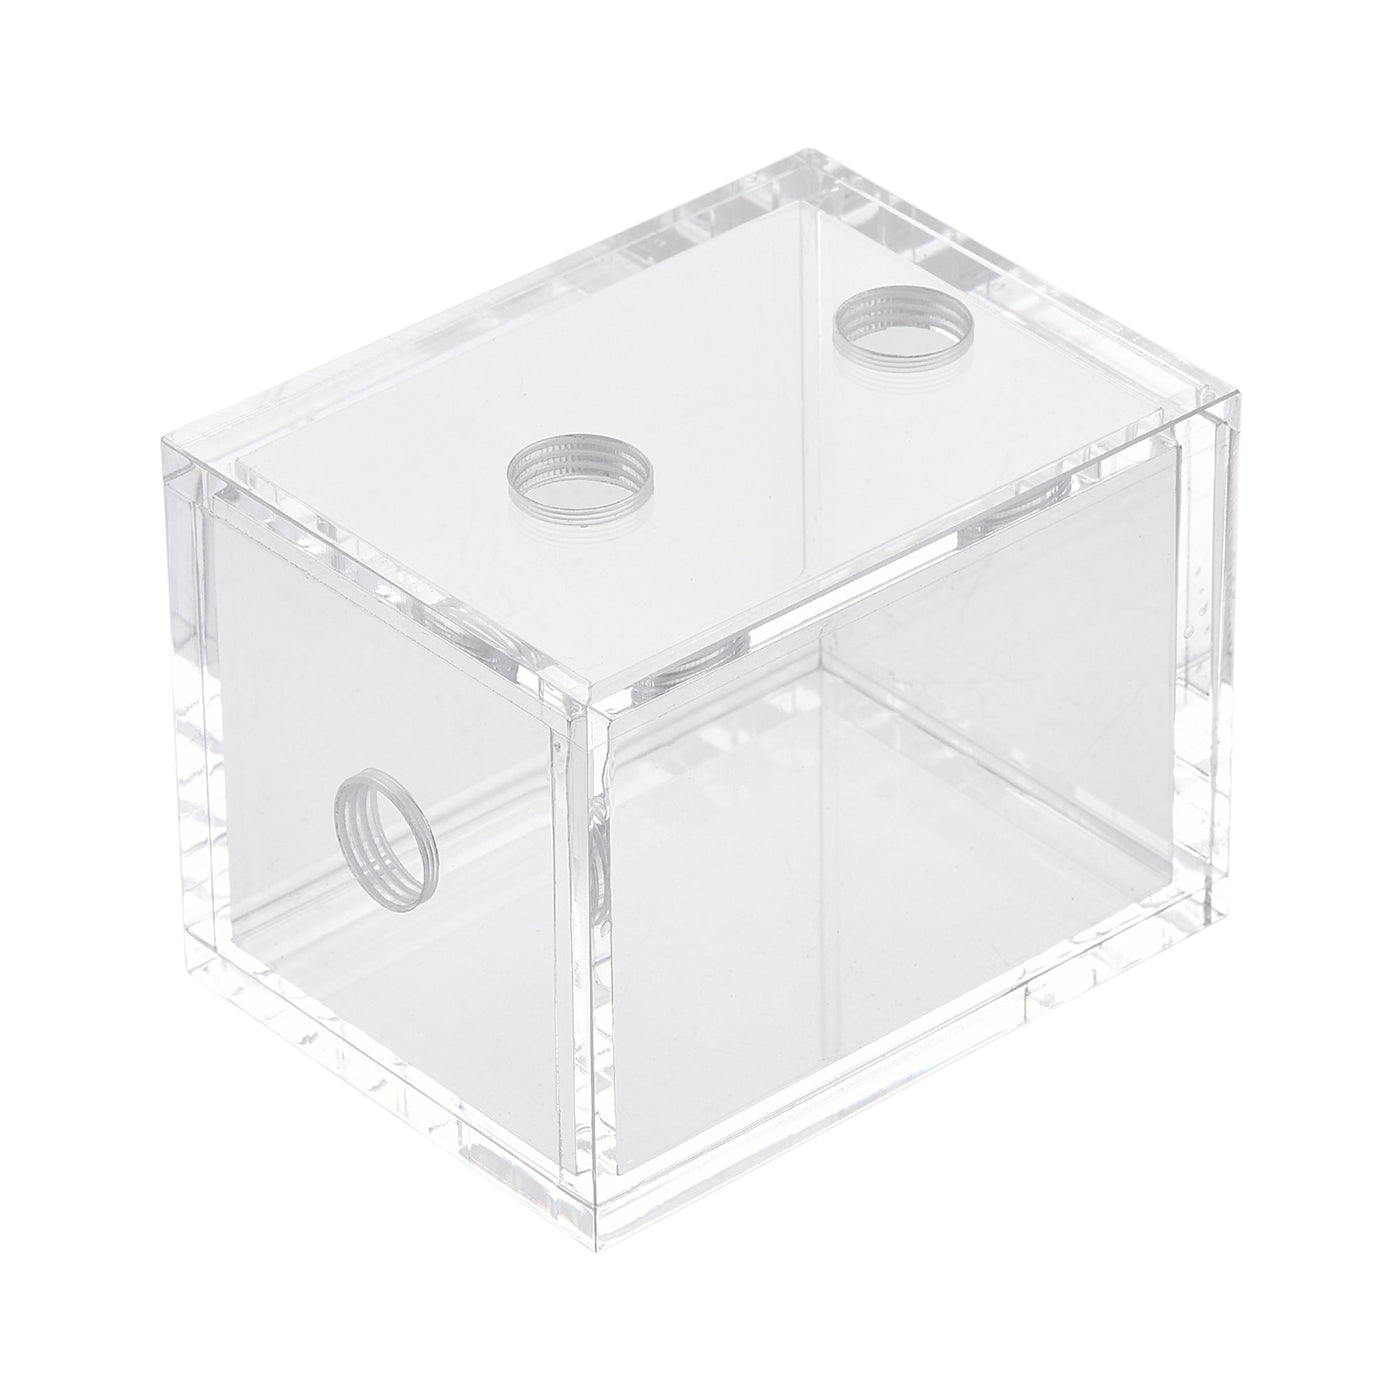 uxcell Uxcell Acrylic Water Cooling Tank 80x60x60mm with 3 Hole for Computer CPU Cooled